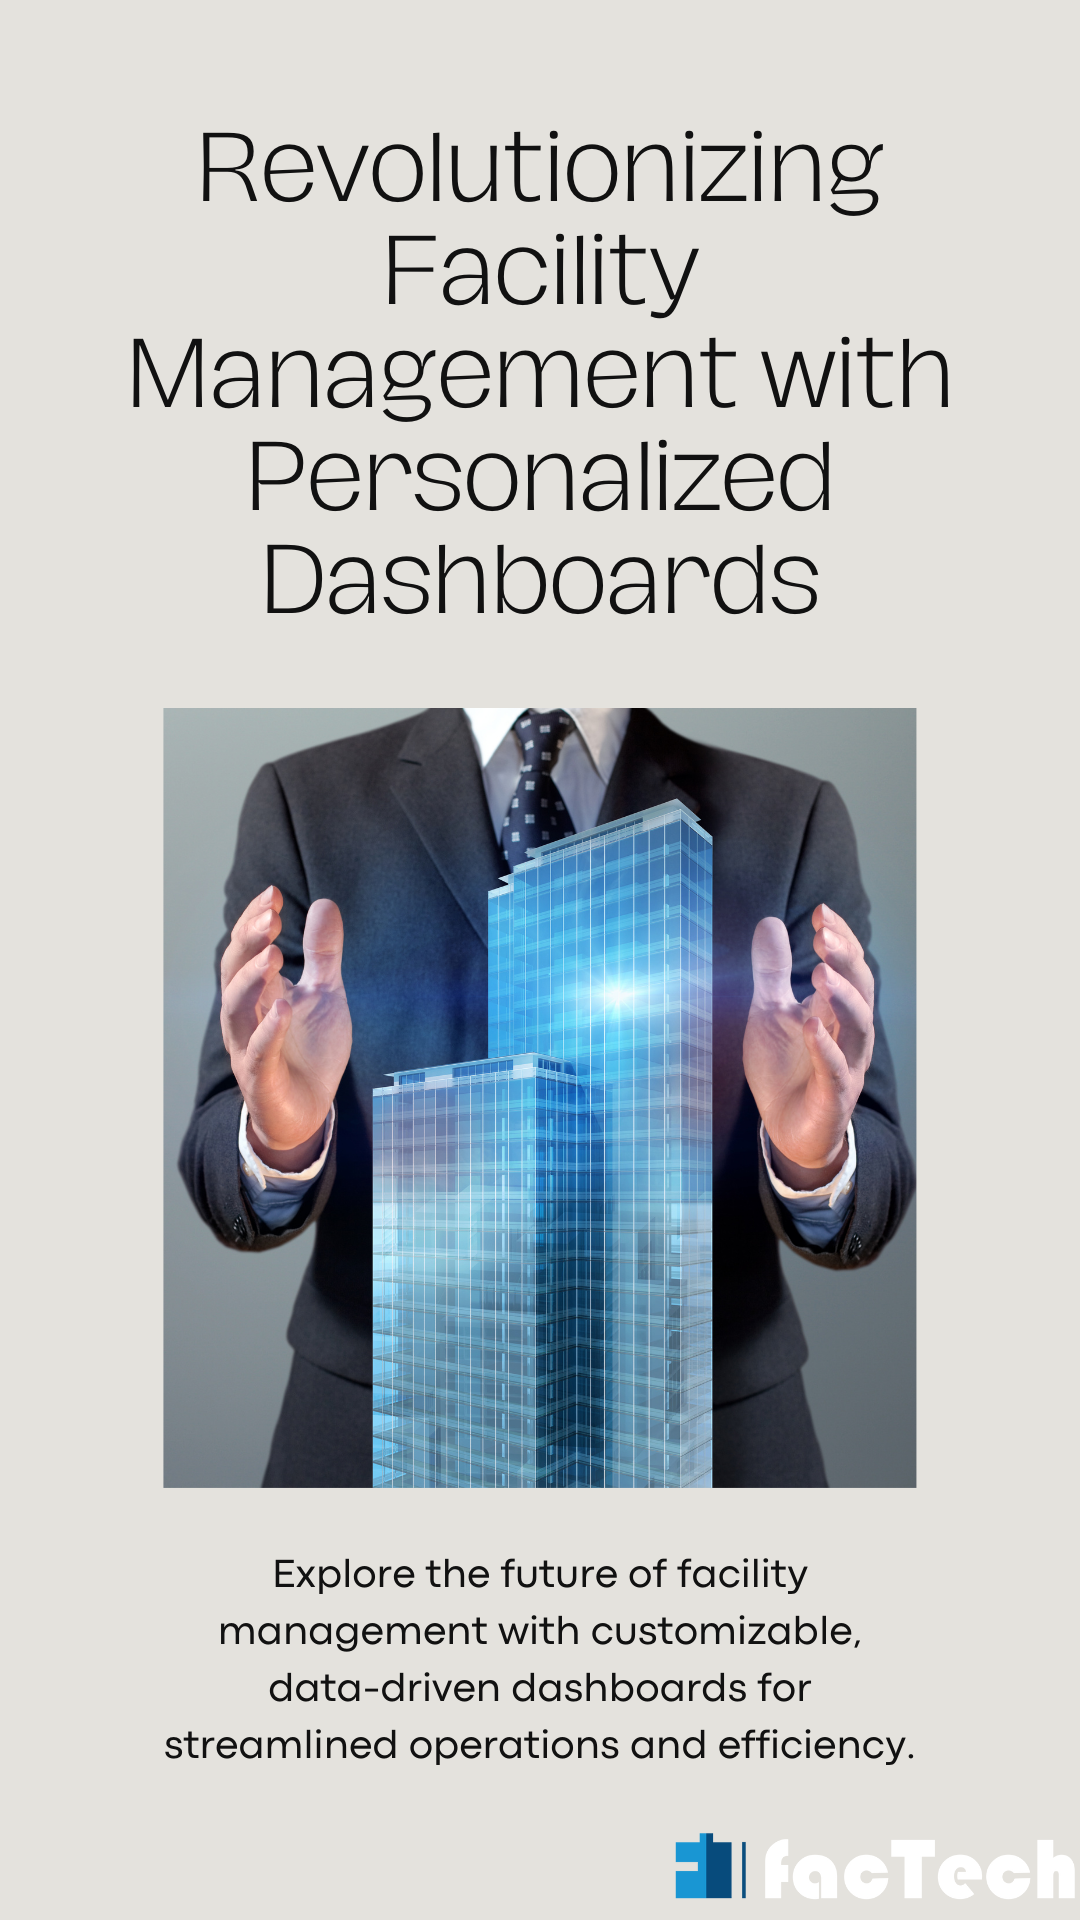 Revolutionizing Facility Management with Personalized Dashboards